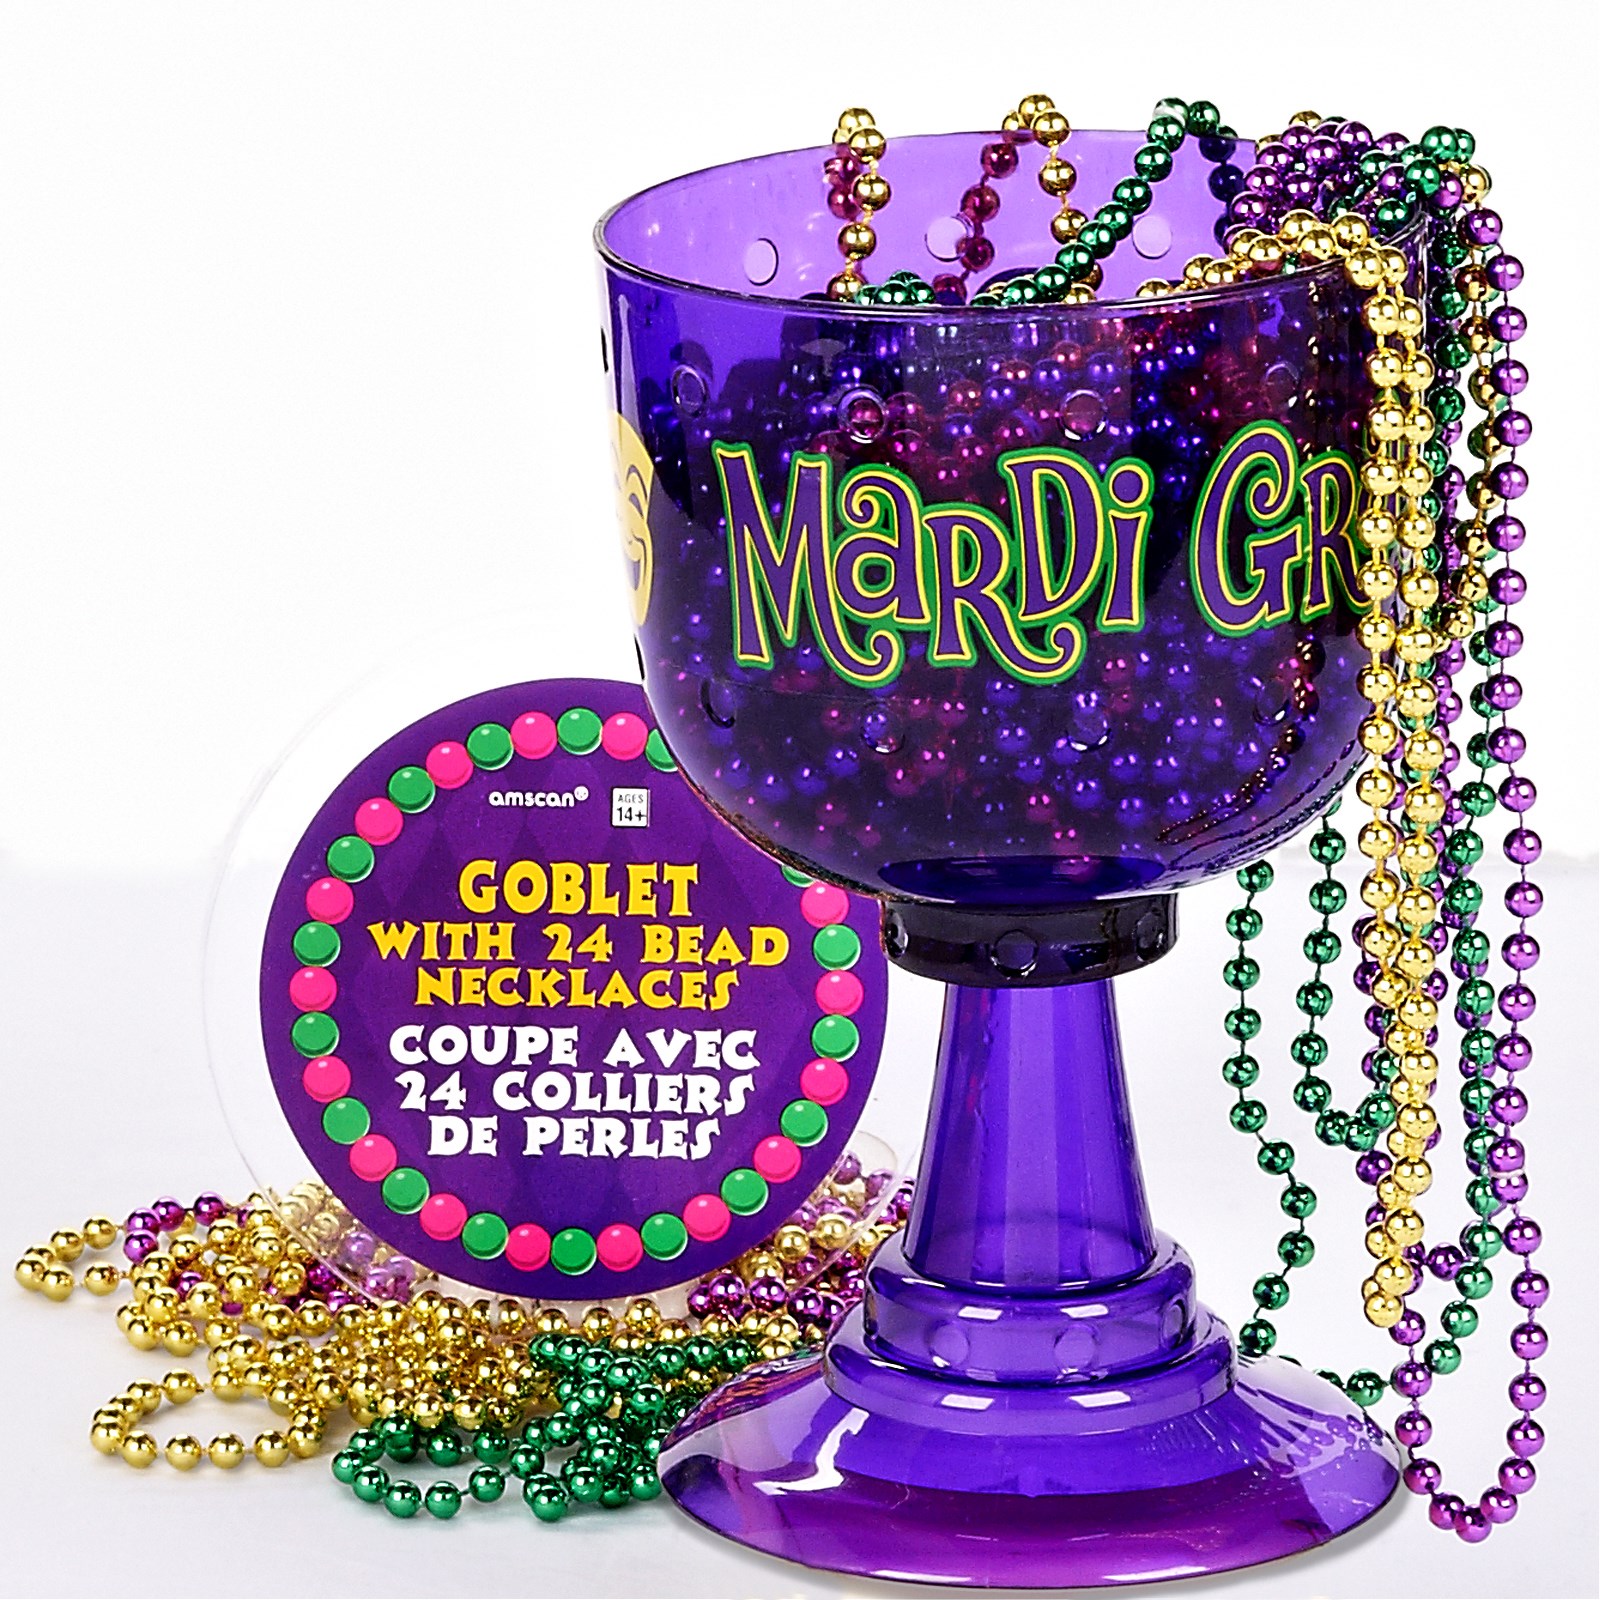 Mardi Gras Cup with Bead Necklaces   Costumes, 72576 